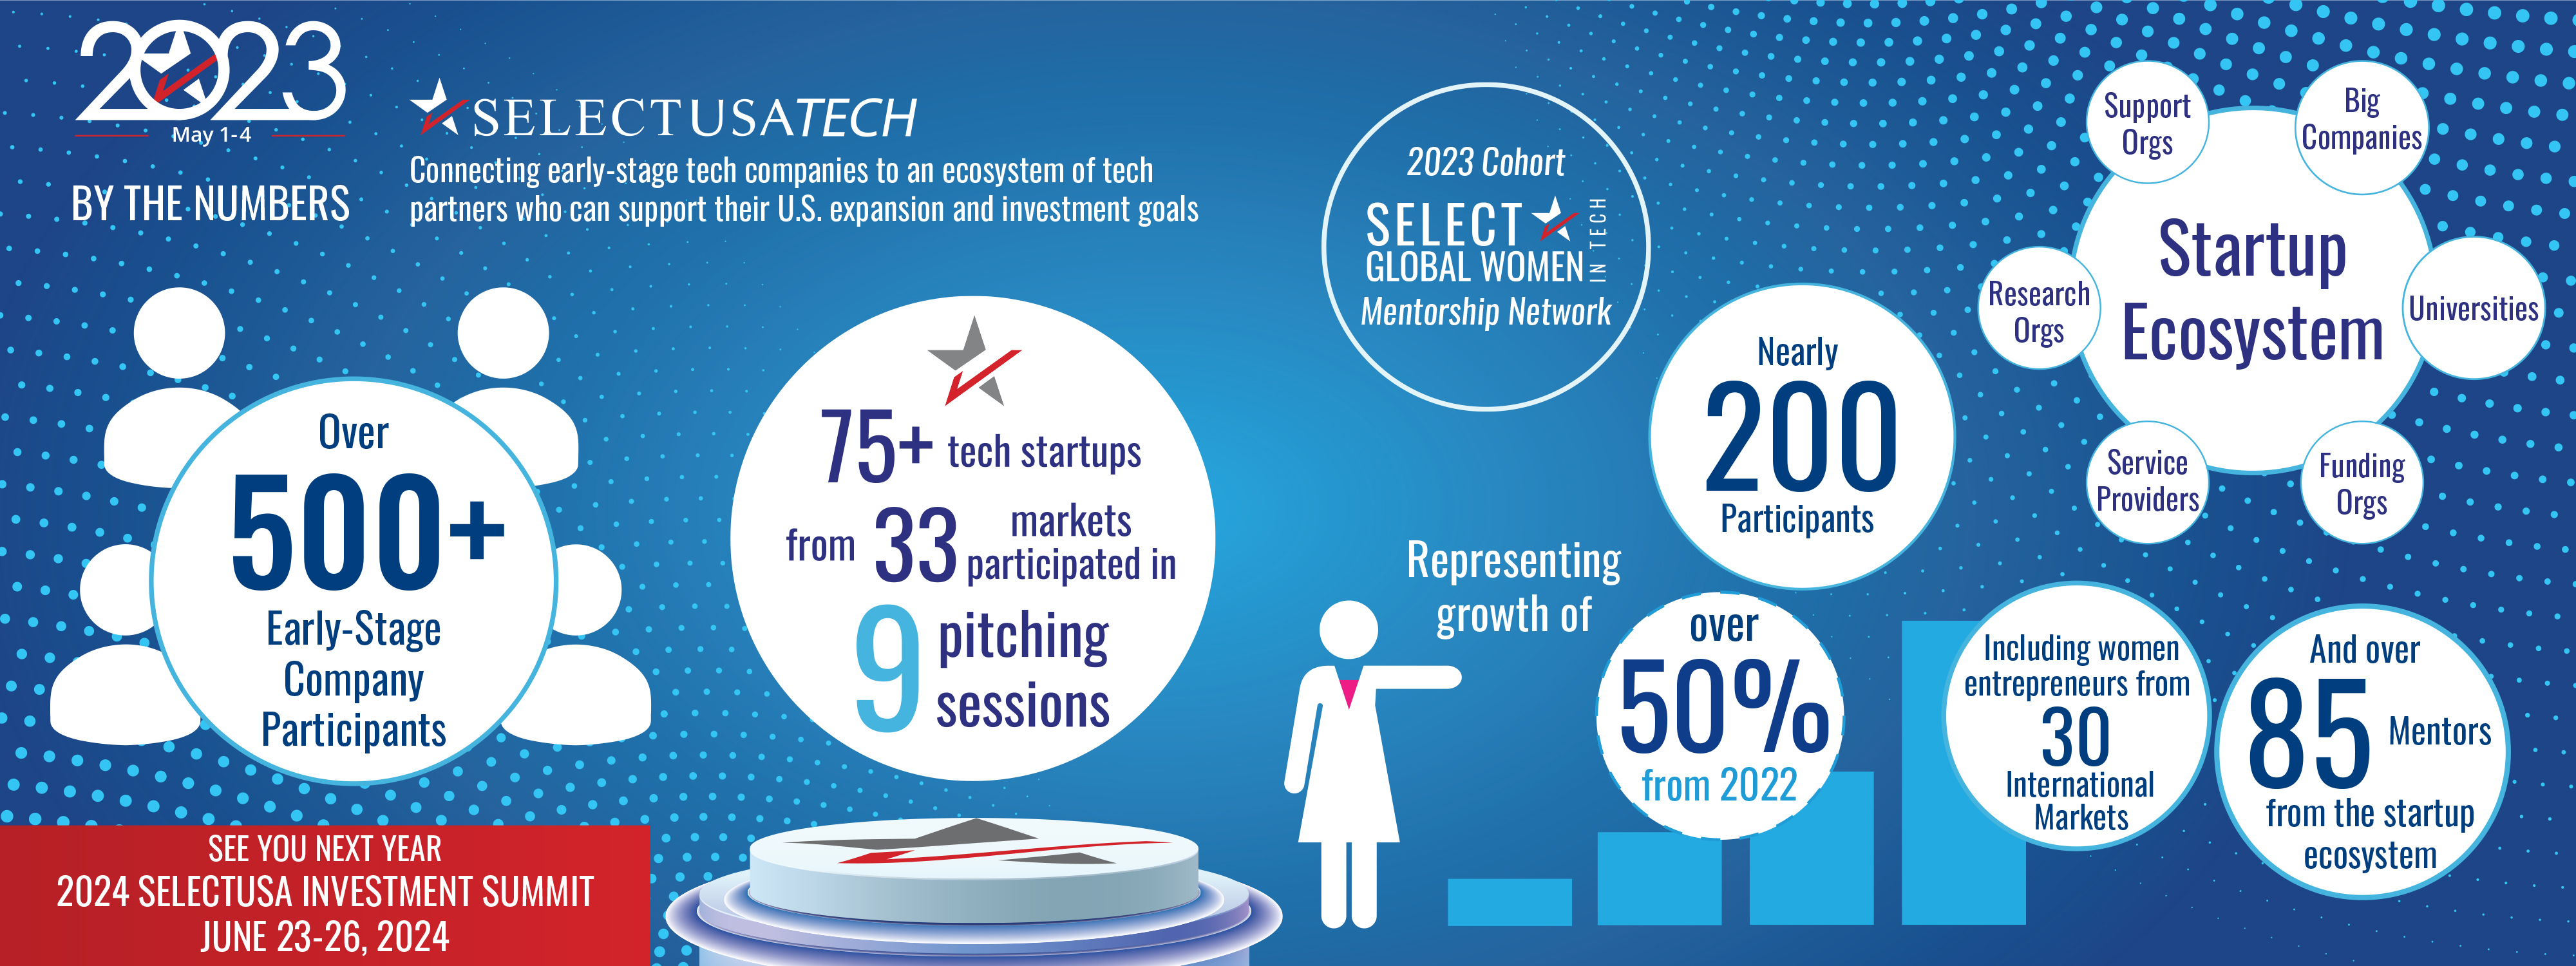 2023 SelectUSA Investment Summit SelectUSA Tech Highlights Graphic